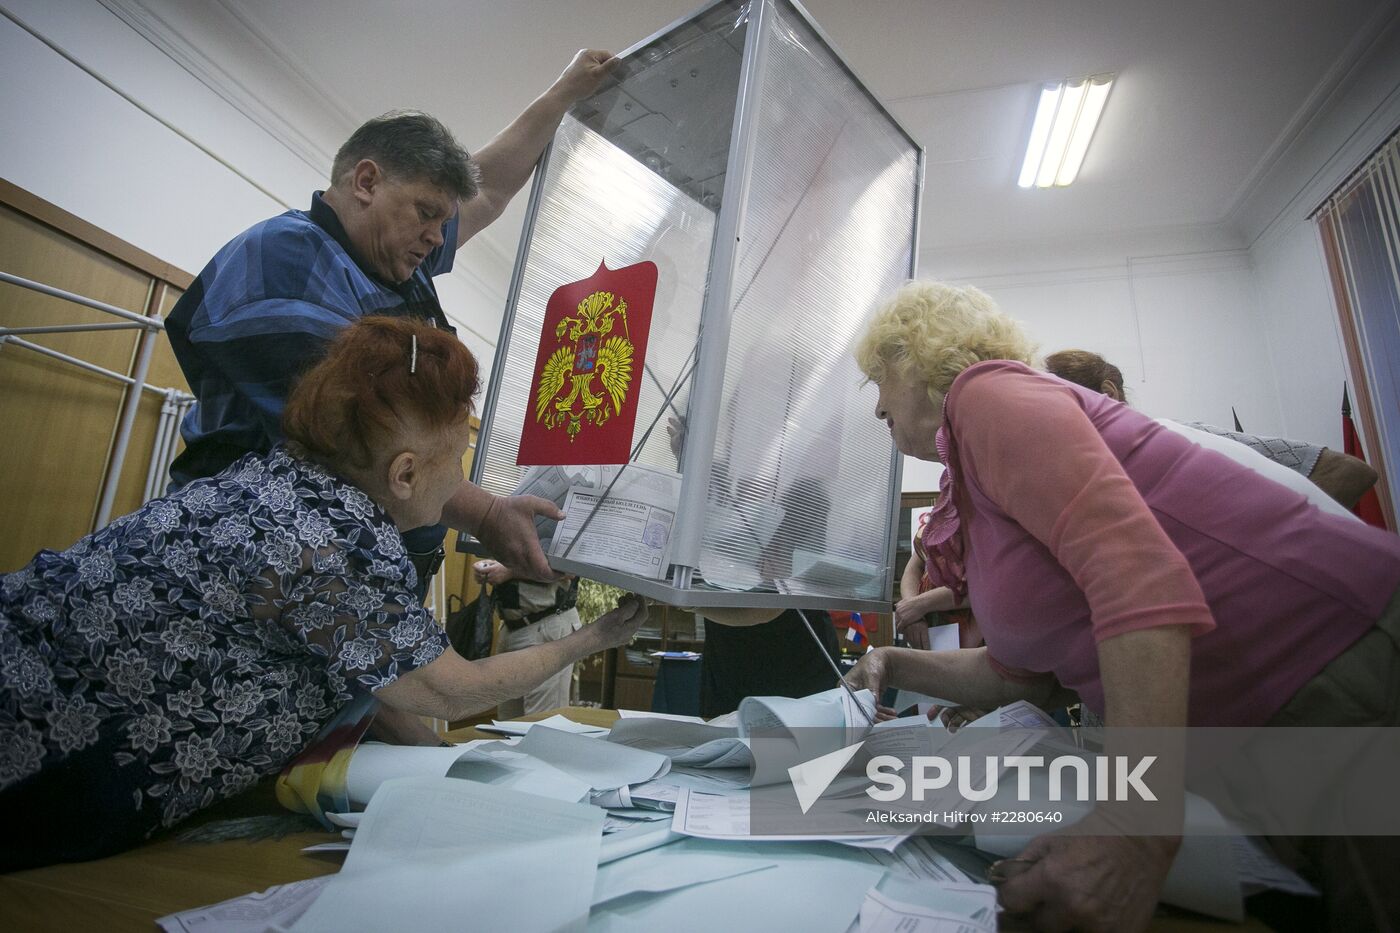 Vote counting after elections on Unified Voting Day